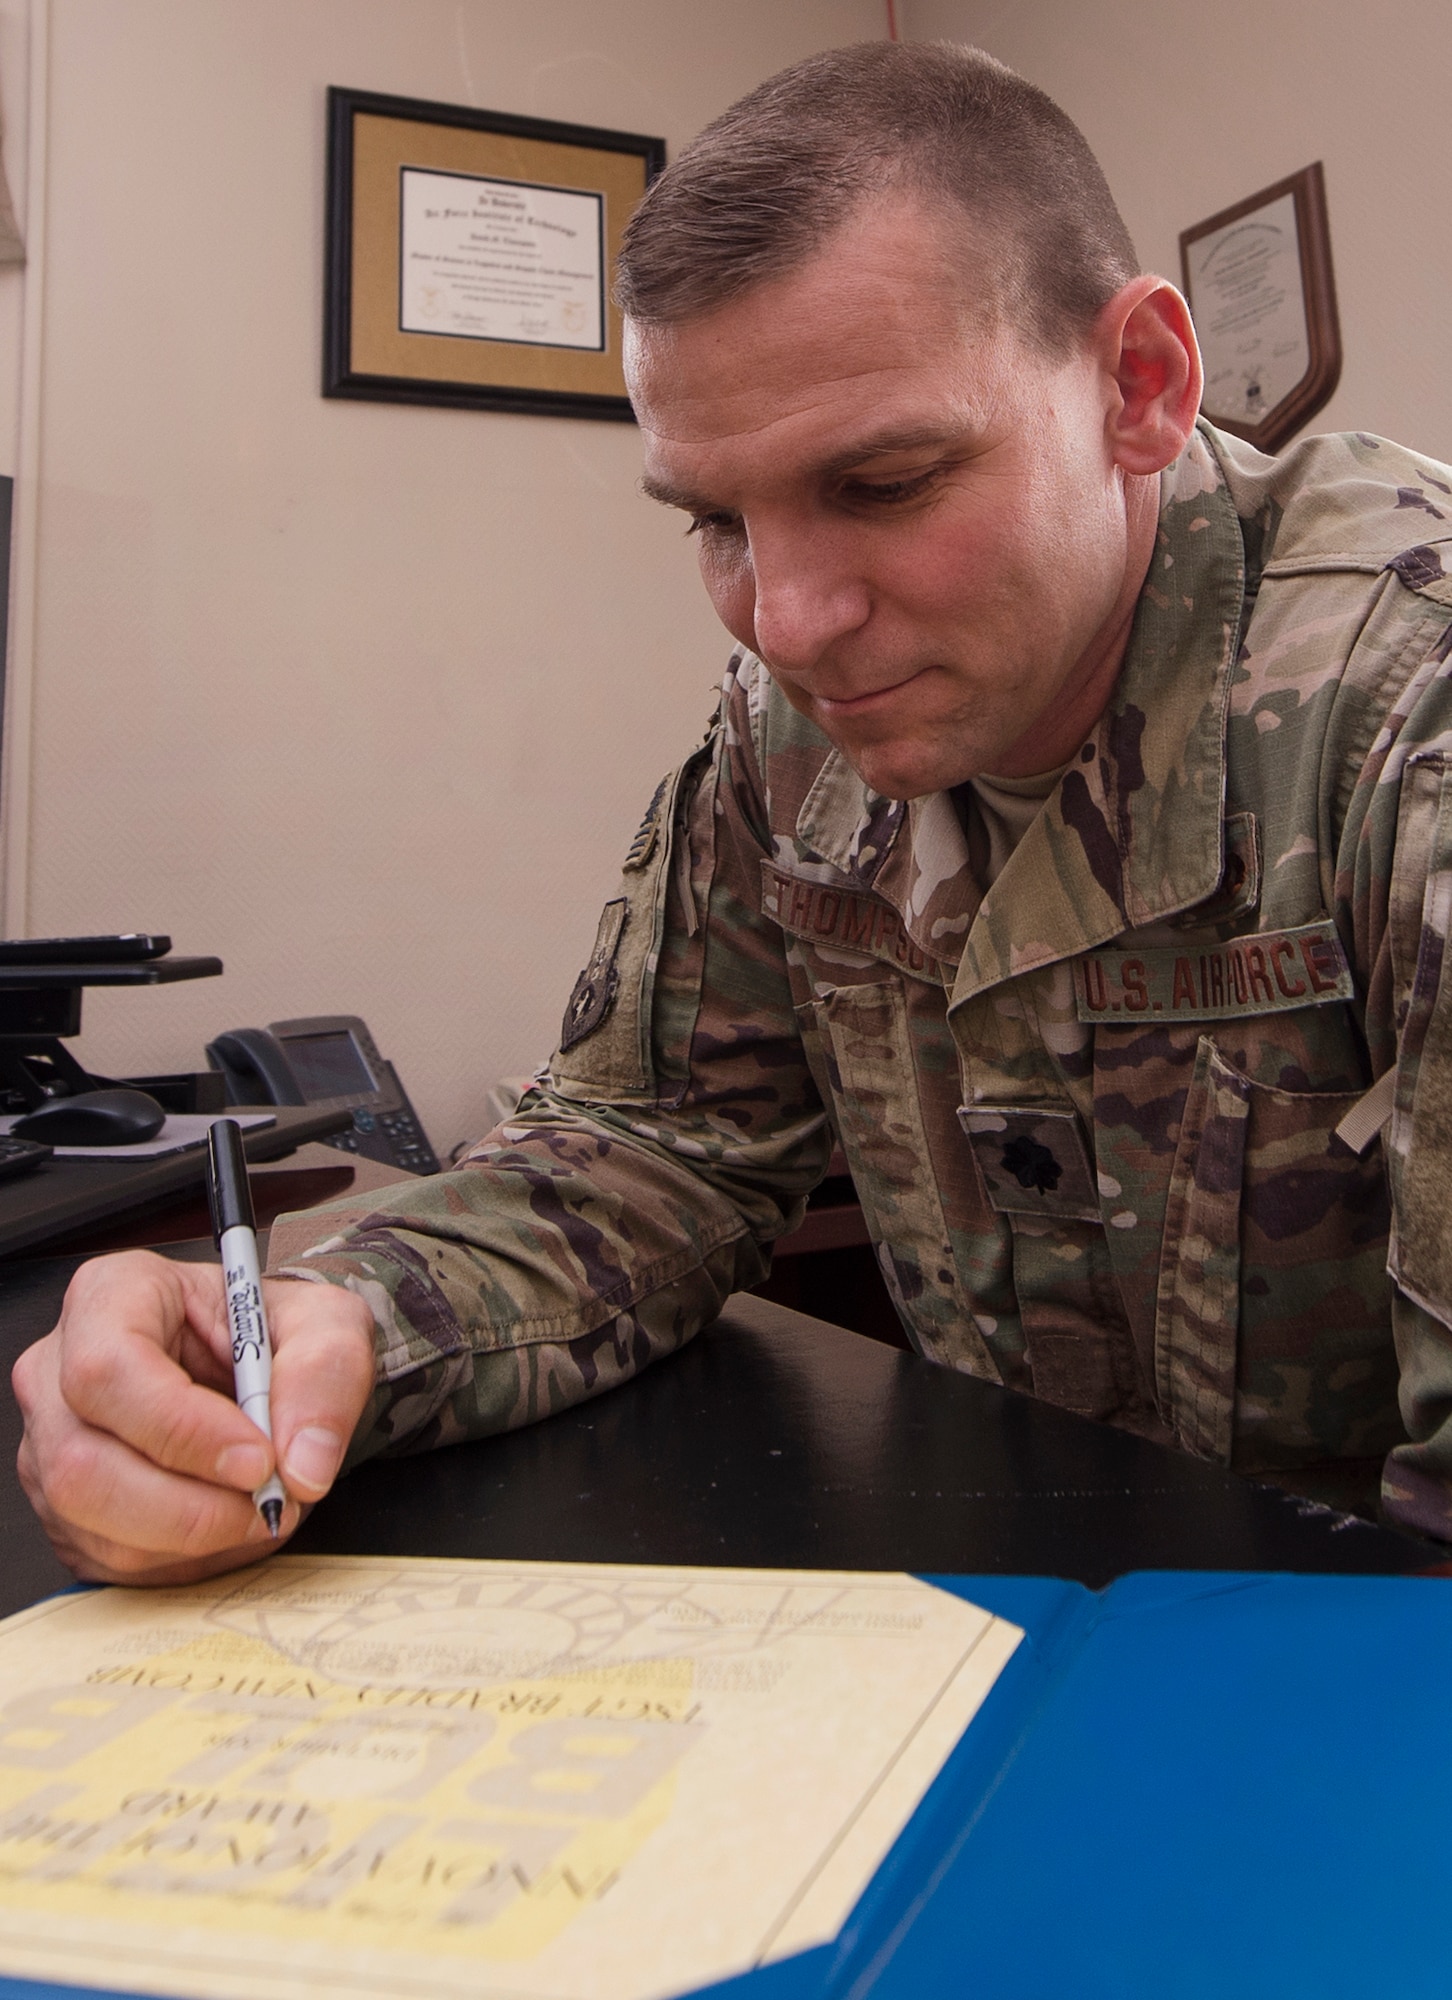 Lt. Col. David Thompson, 379th Expeditionary Aircraft Maintenance Squadron commander, reviews an innovation award citation Jan. 17, 2019, at Al Udeid Air Base, Qatar. Thompson implemented the award program to recognize Airmen in his squadron who improve programs and processes within his unit. Tech. Sgt. Bradley Newcomb, 379th EAMXS was presented the award in December, 2018, for coming up with a better standard procedure to set up and tear down RC-135 Rivet Joint air carts, saving a total of 480 man hours a month. (U.S. Air Force photo by Tech. Sgt. Christopher Hubenthal)